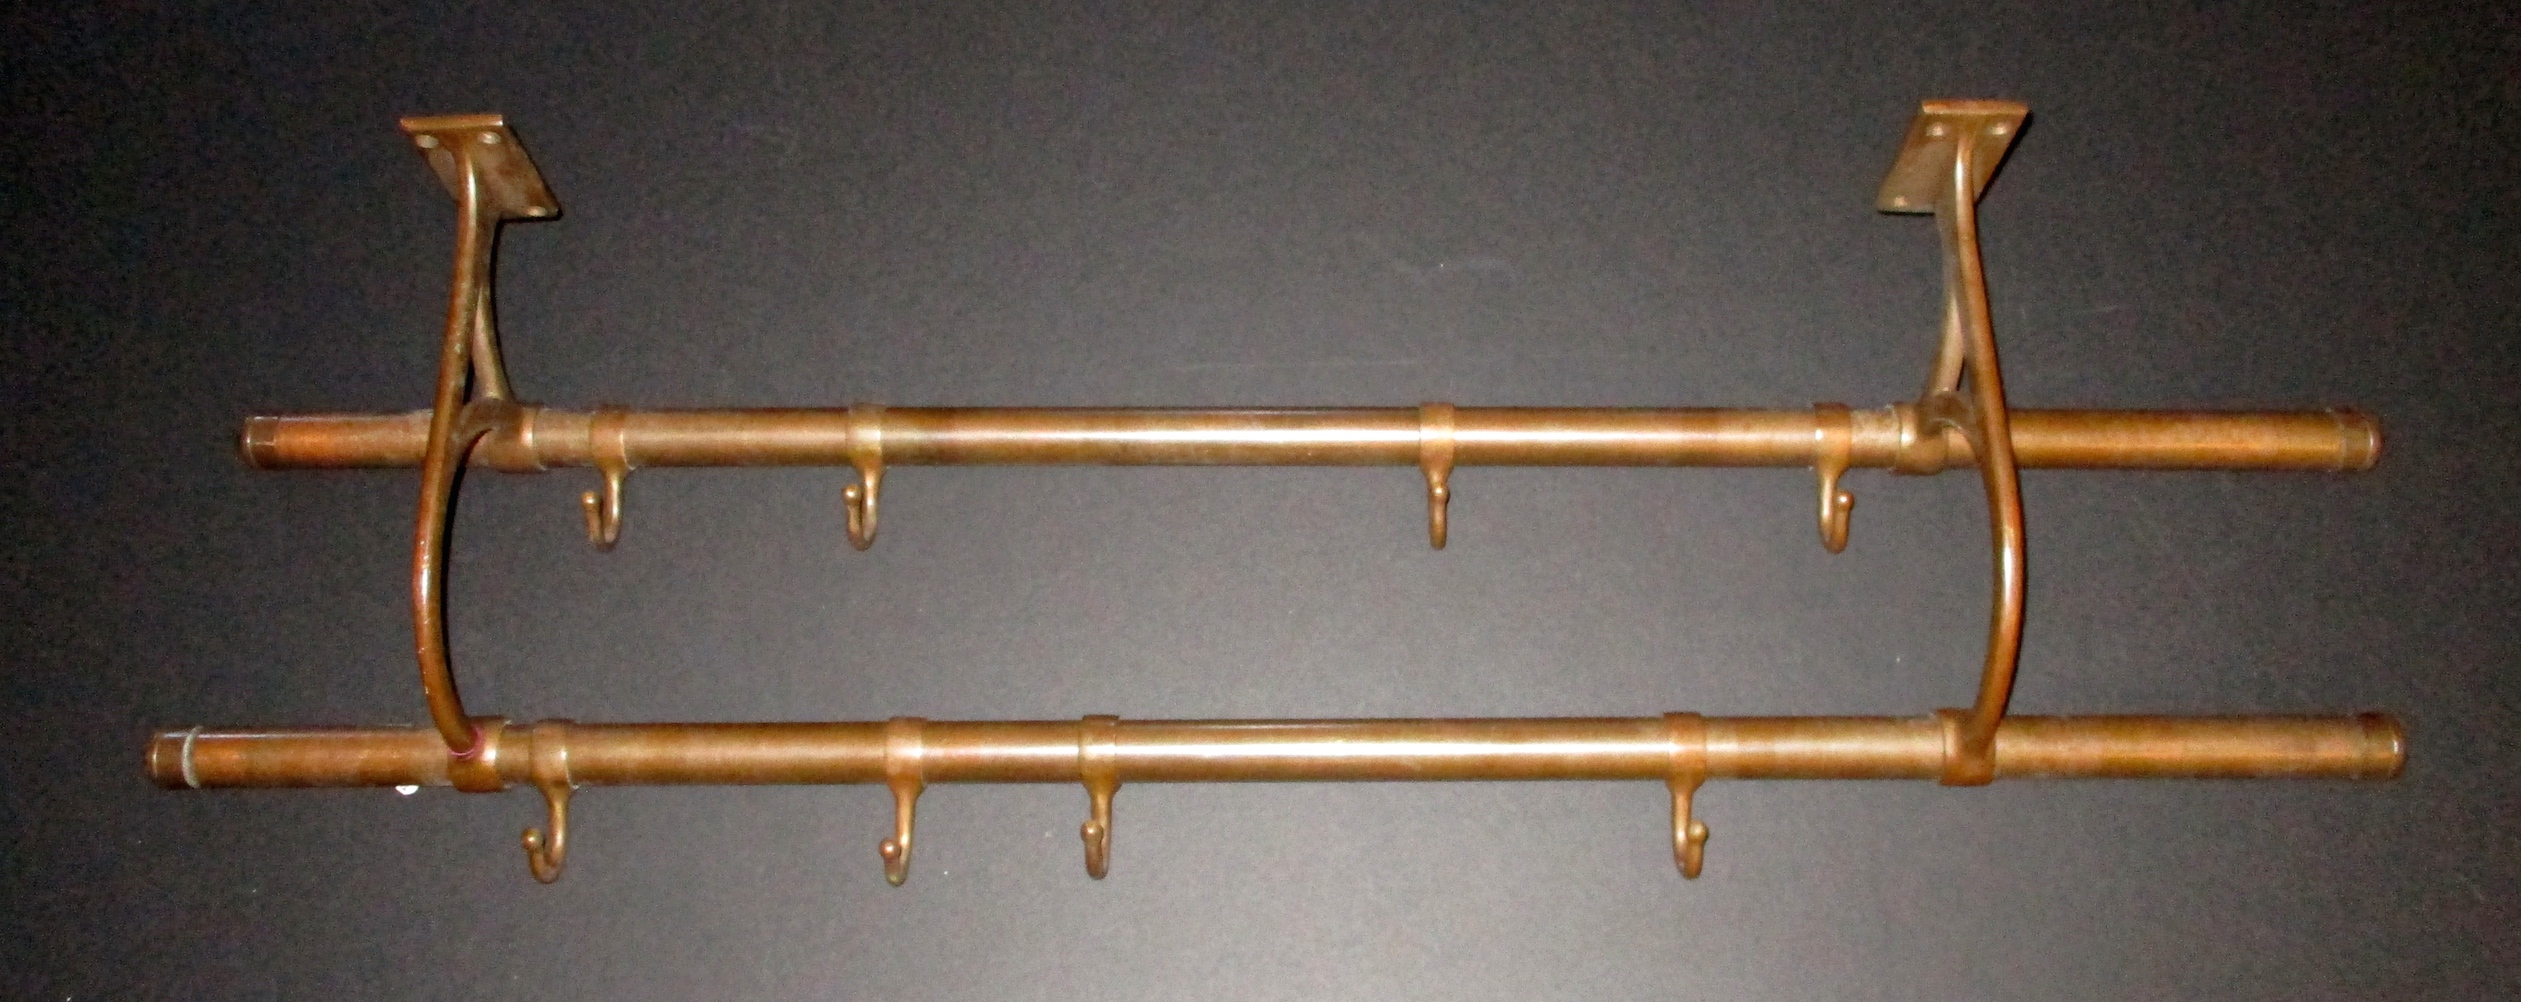 Copper Washed Brass Wall Mount Hats & Coats Rack w/Adjustable Mounting & Hooks (6" H x 9 1/2" D x 36" W)